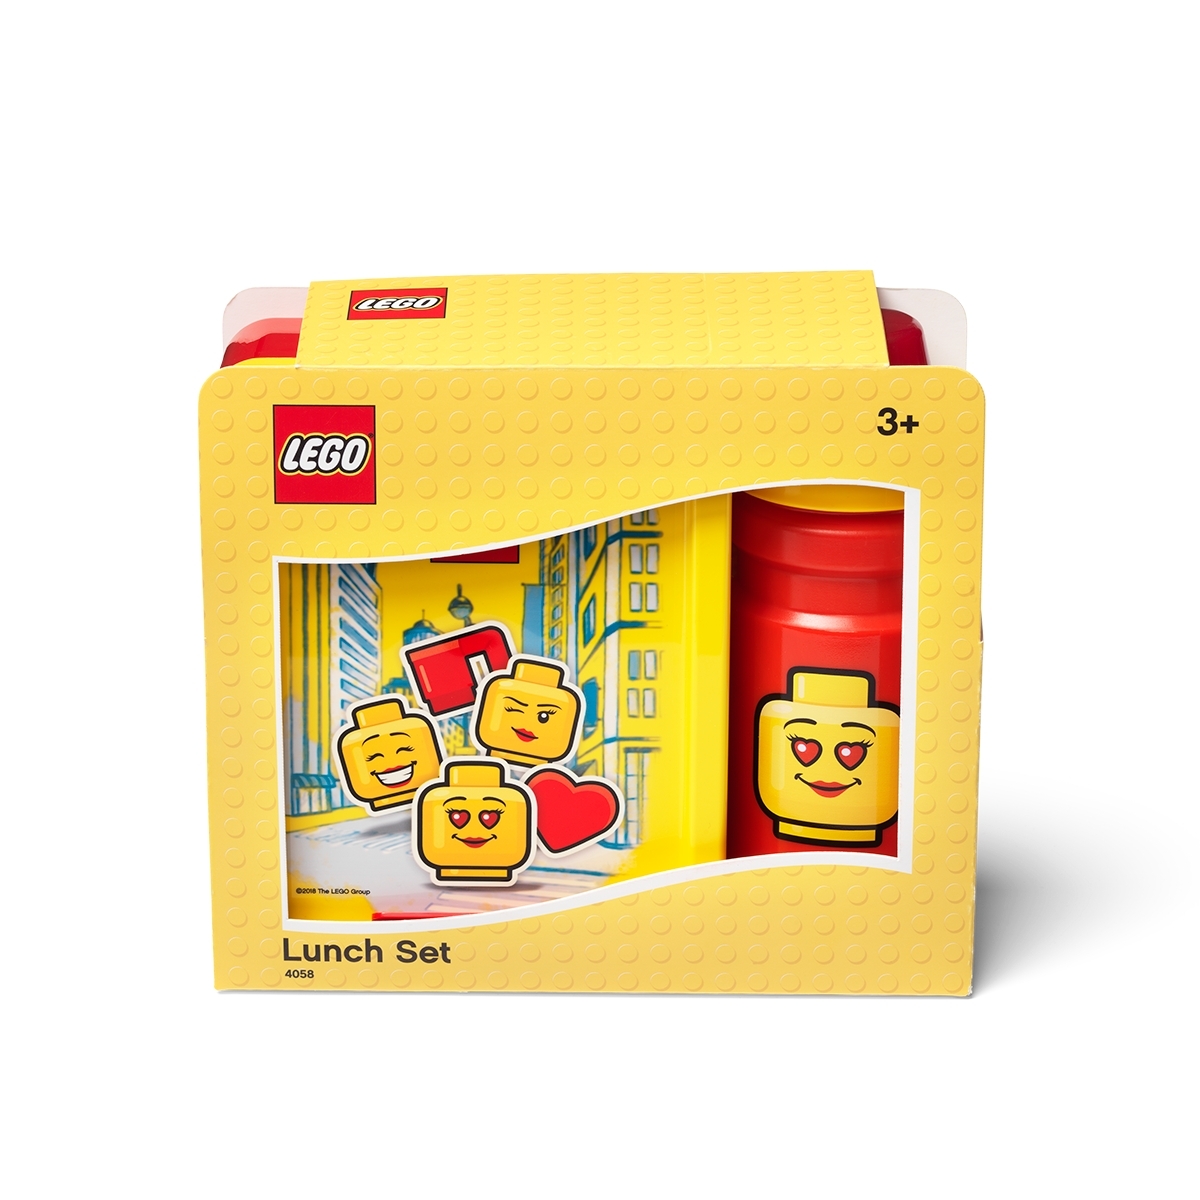 Lunch Set – Iconic Girl 5005770 | Other | Buy online at the Official LEGO®  Shop US